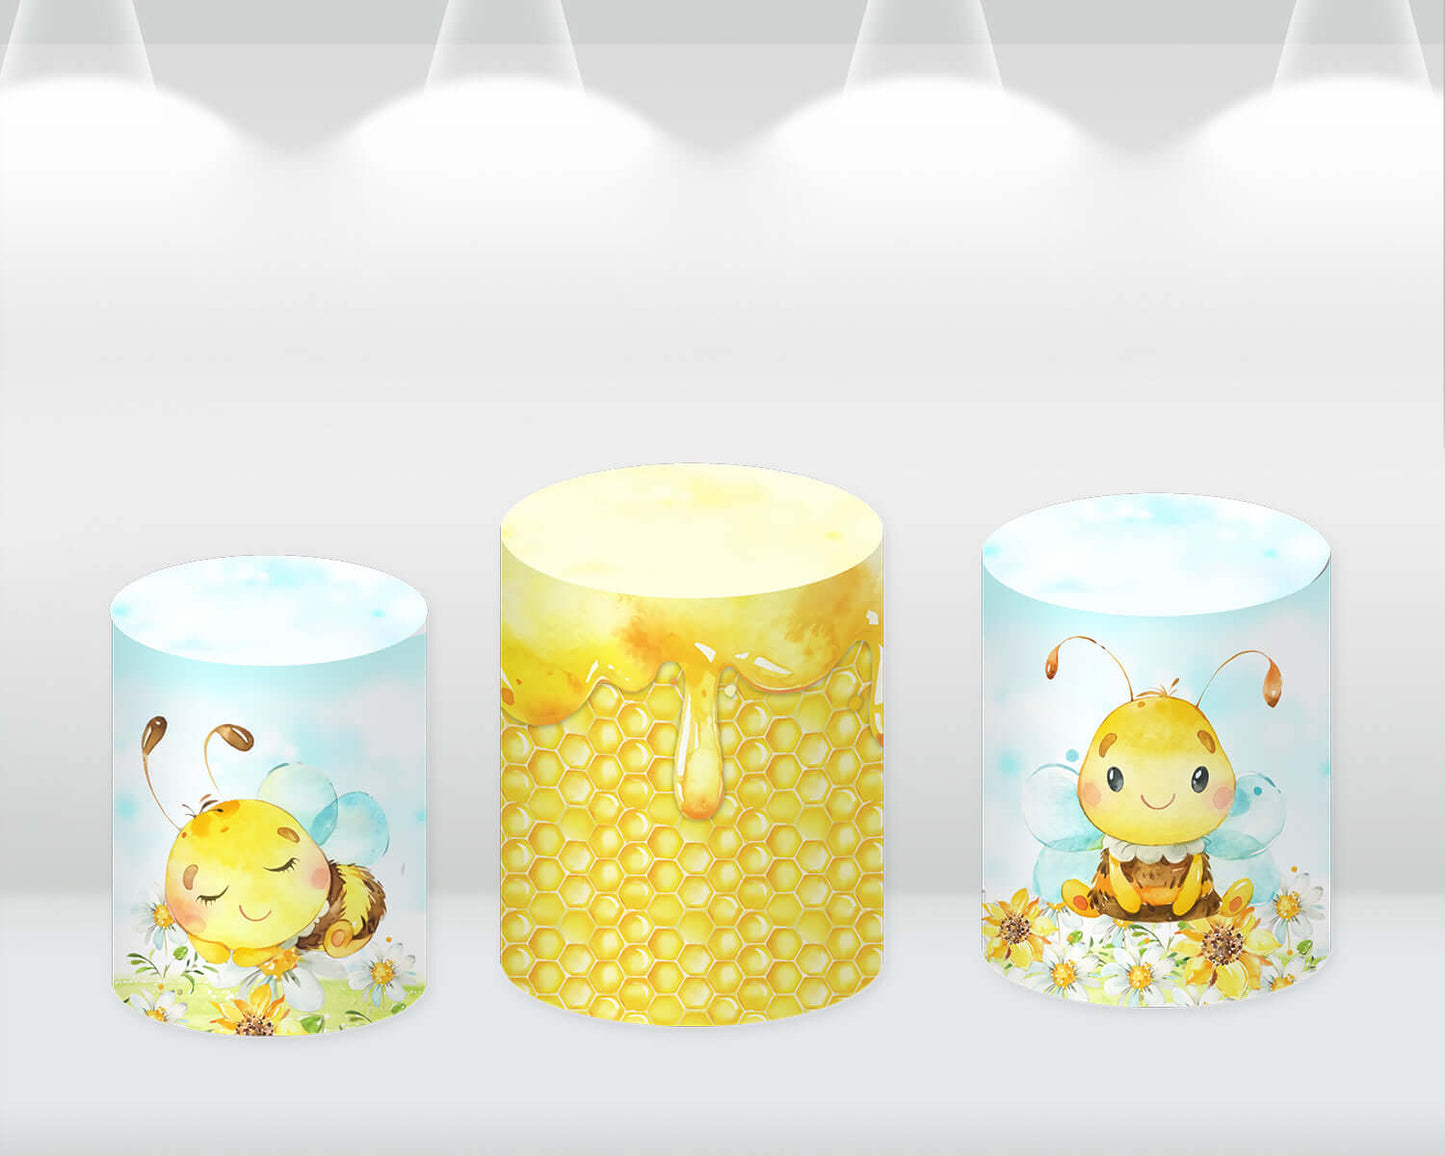 Newborn Baby Shower Round Backdrop Cover Yellow Honey Bee Birthday Party Circle Cover Photography Background Pedestal Cylinder Covers